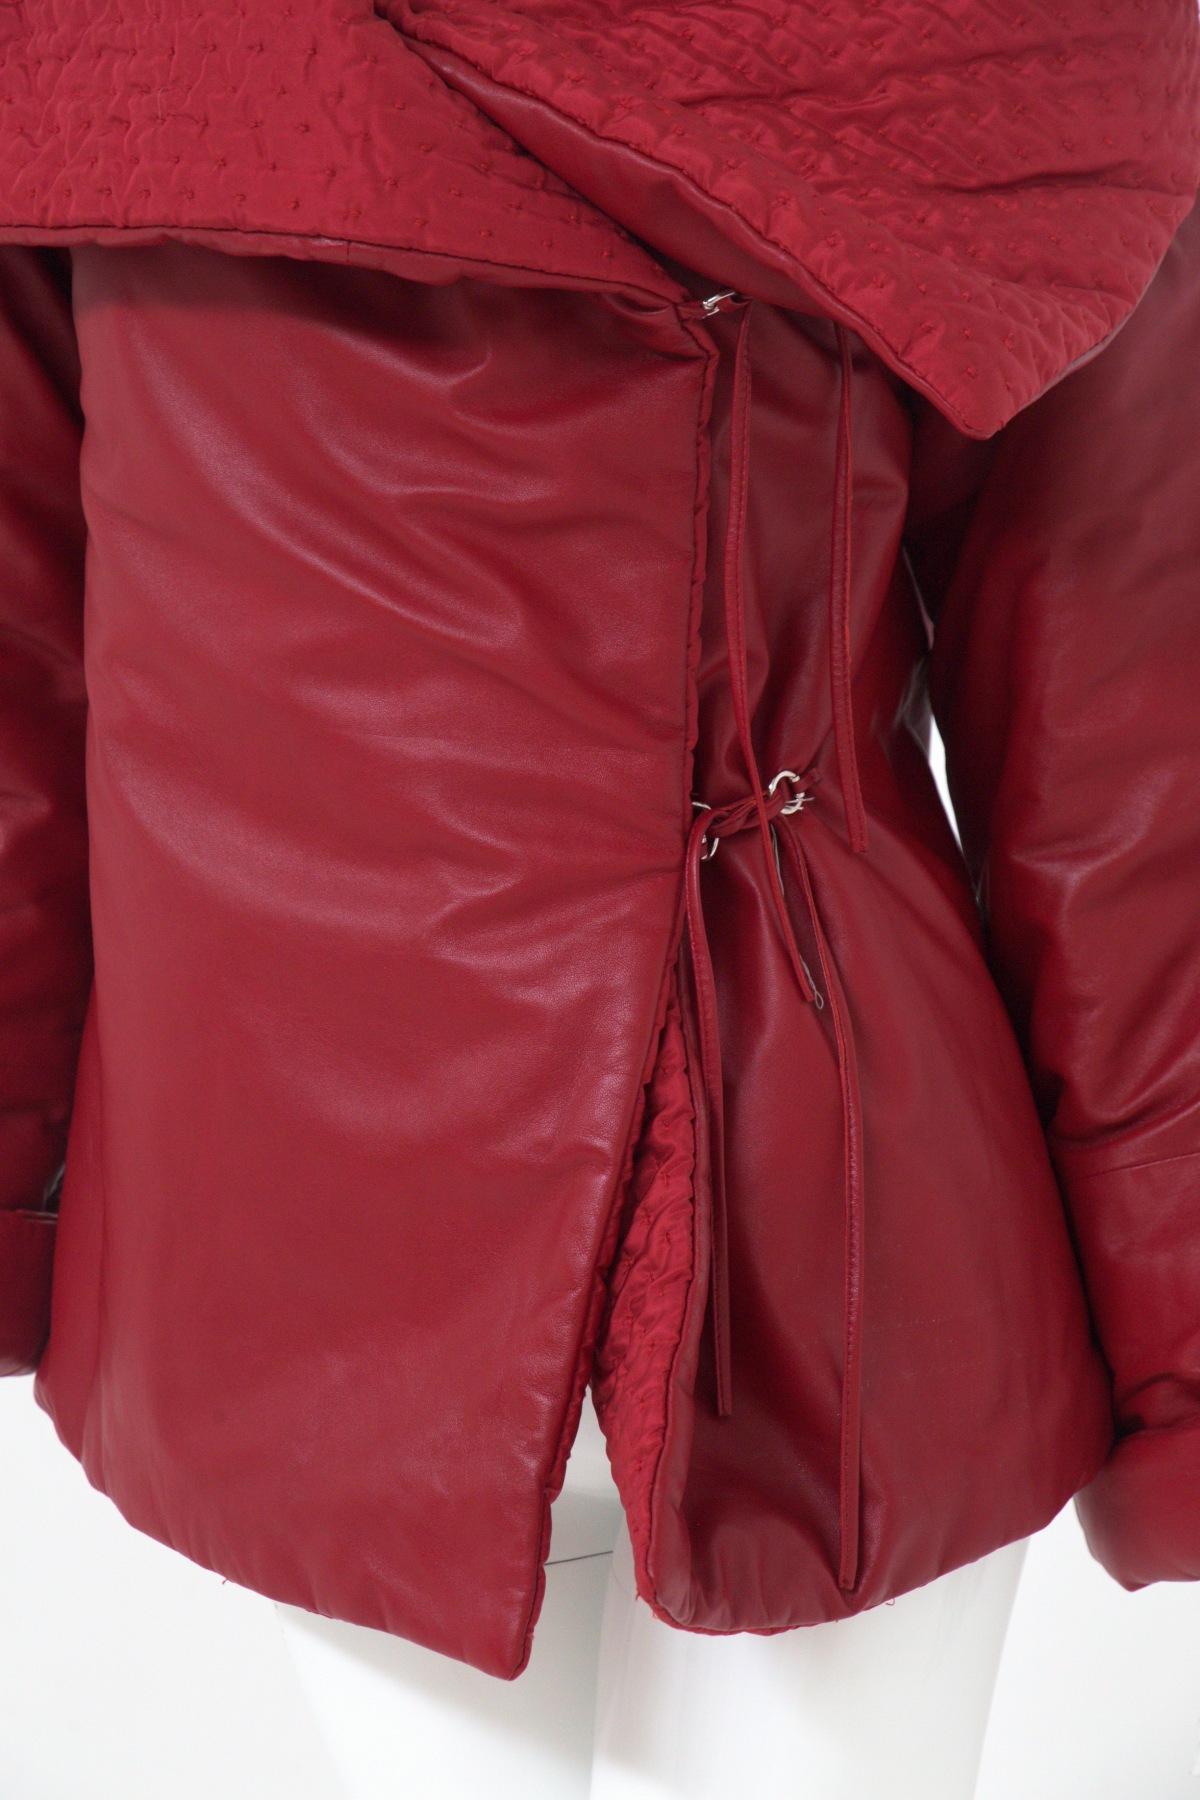 Gianfranco Ferré Rare Oversized Red Leather Jacket For Sale 8